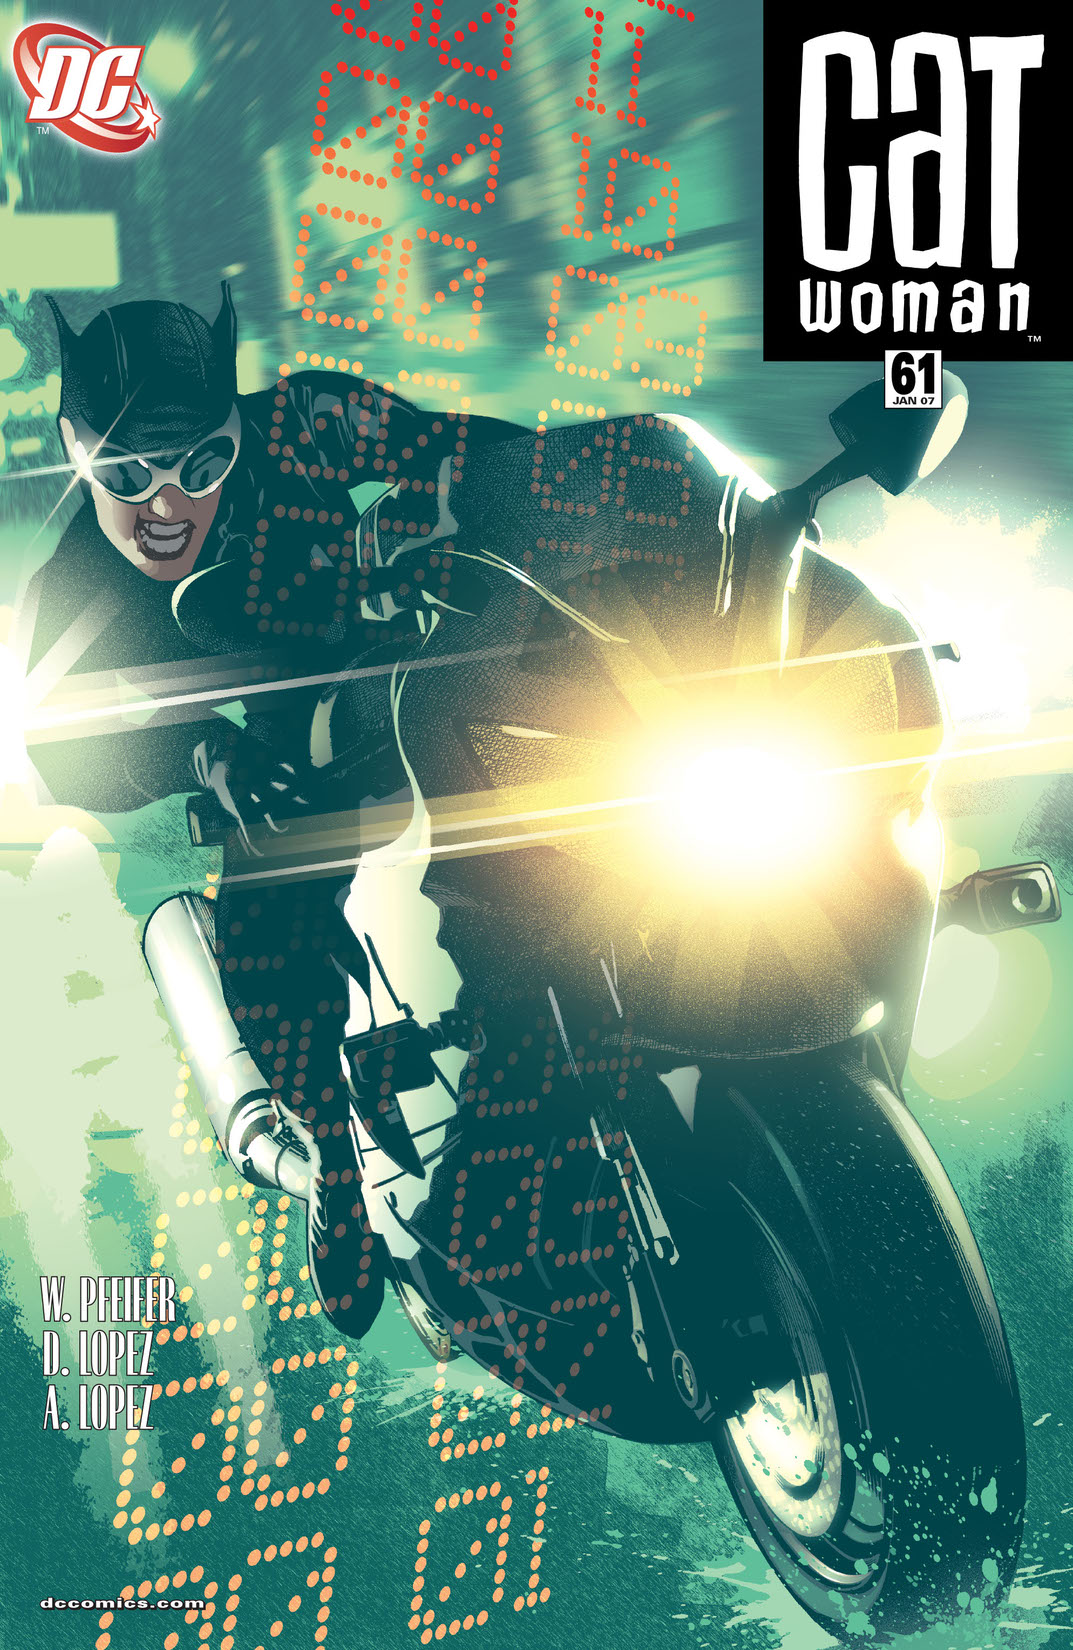 Catwoman (2001-) #61 preview images